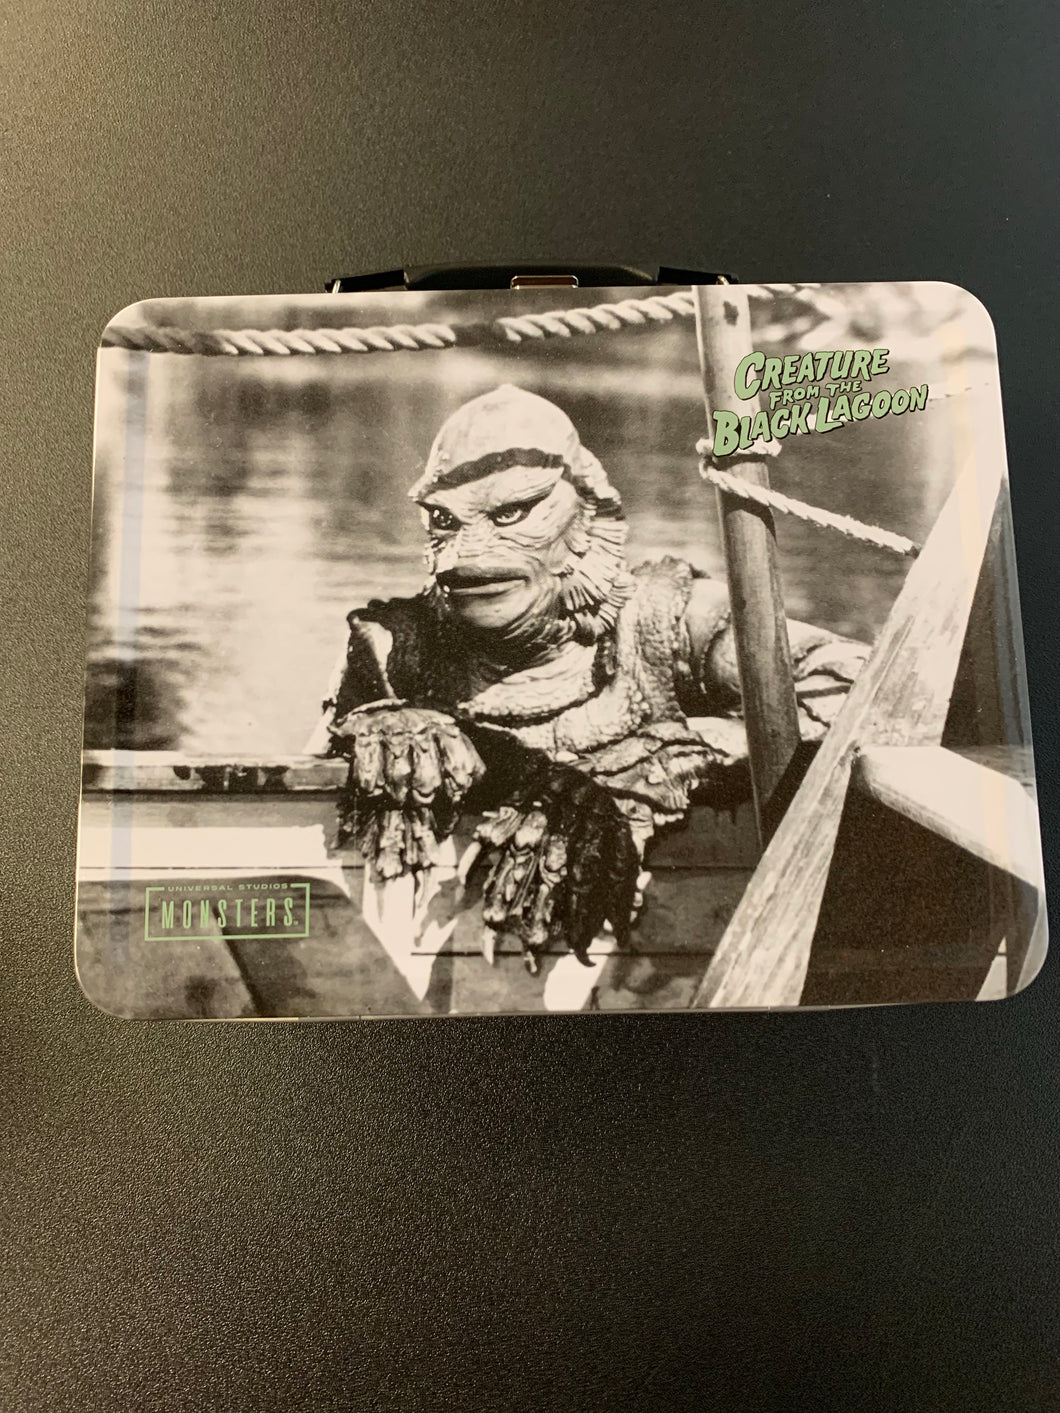 UNIVERSAL STUDIOS MONSTERS CREATURE FROM THE BLACK LAGOON LUNCHBOX TIN TOTE